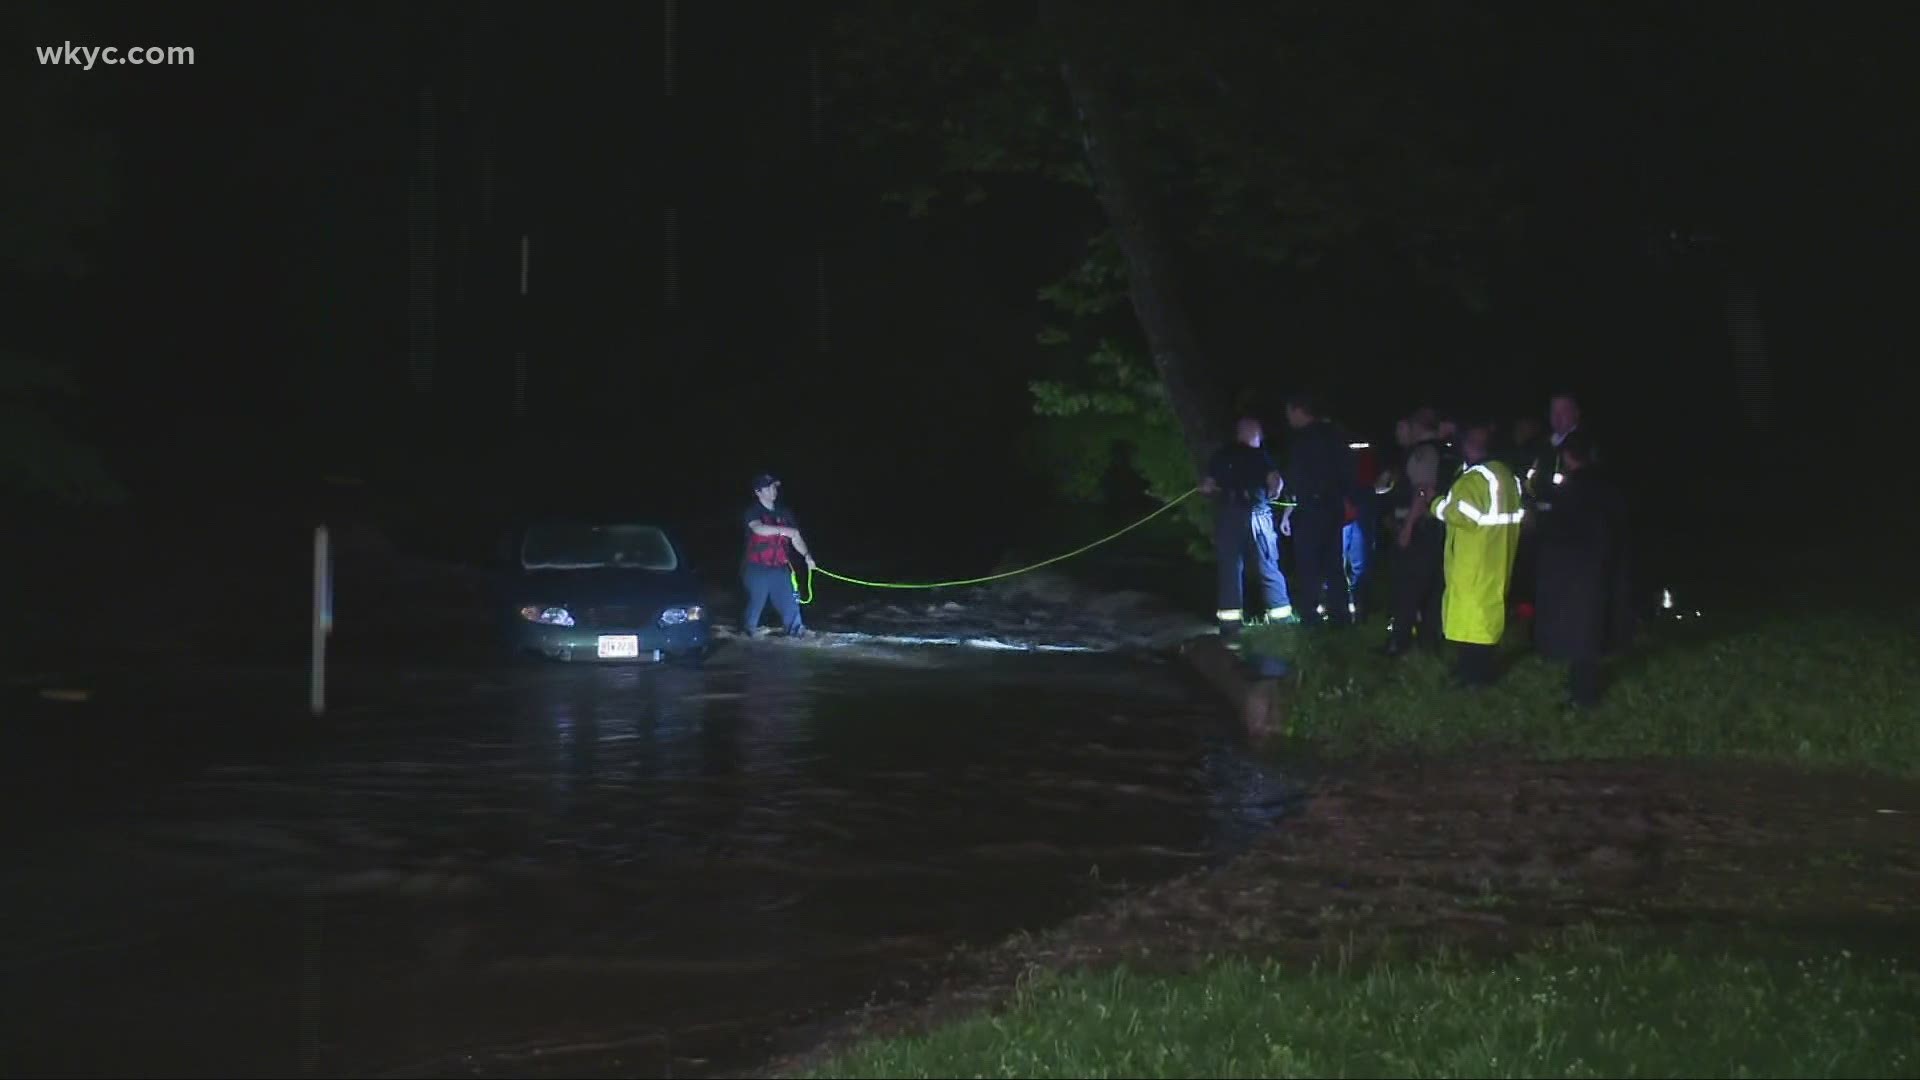 Police say the vehicle drove through flood waters before crashing.